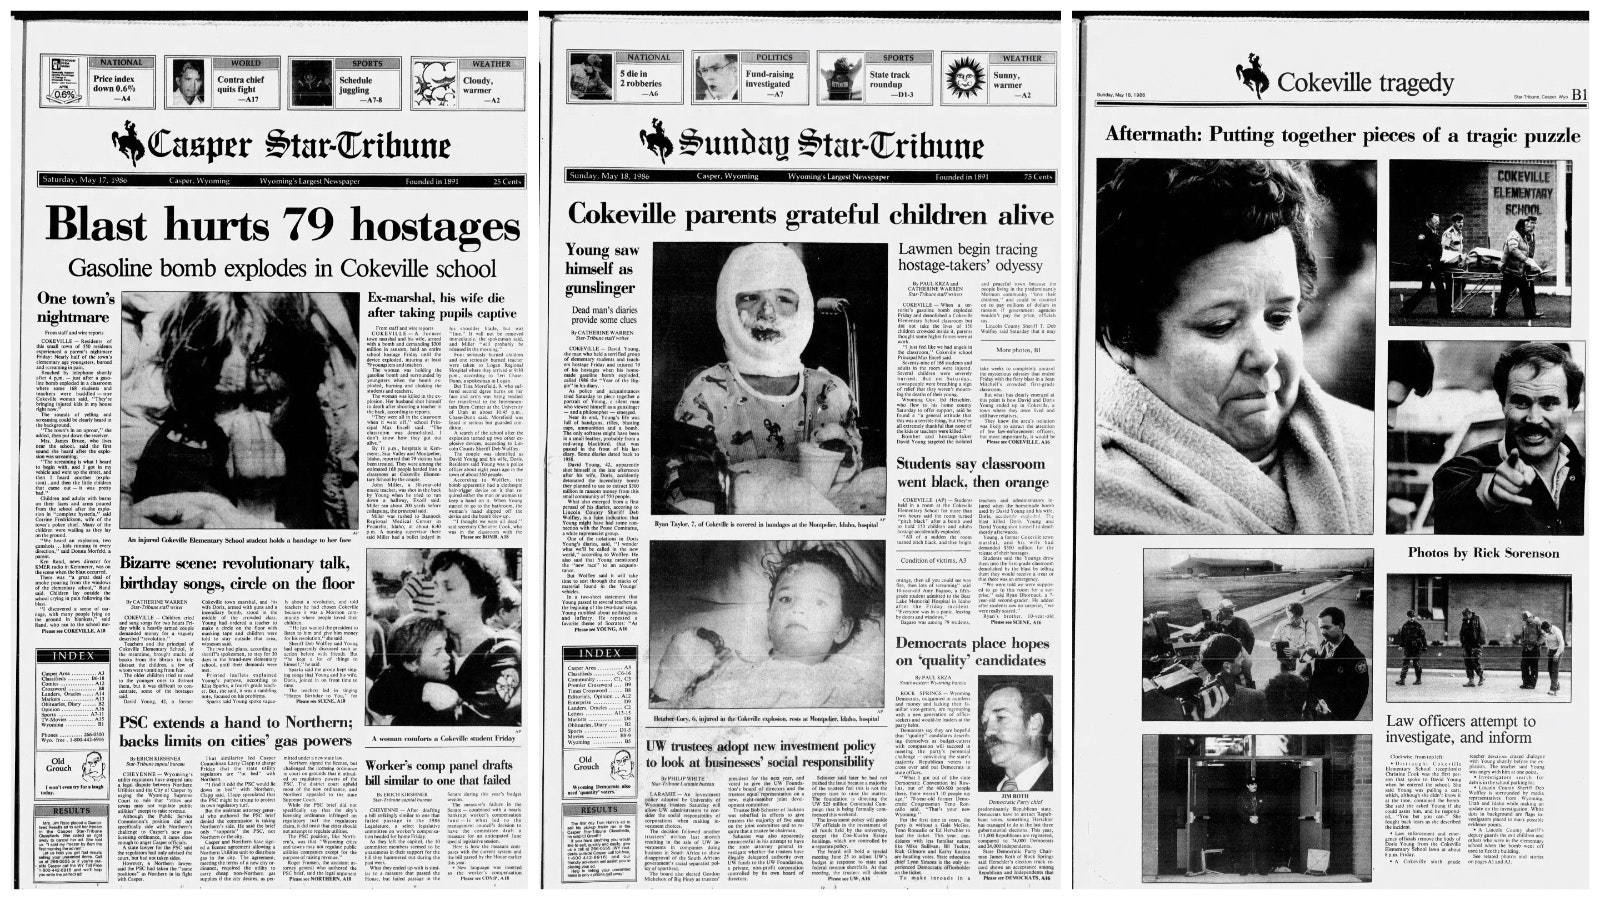 Front pages of the Casper Star-Tribune from the day after, Saturday, May 17, 1986, left; and May 18, 1986, center and right.